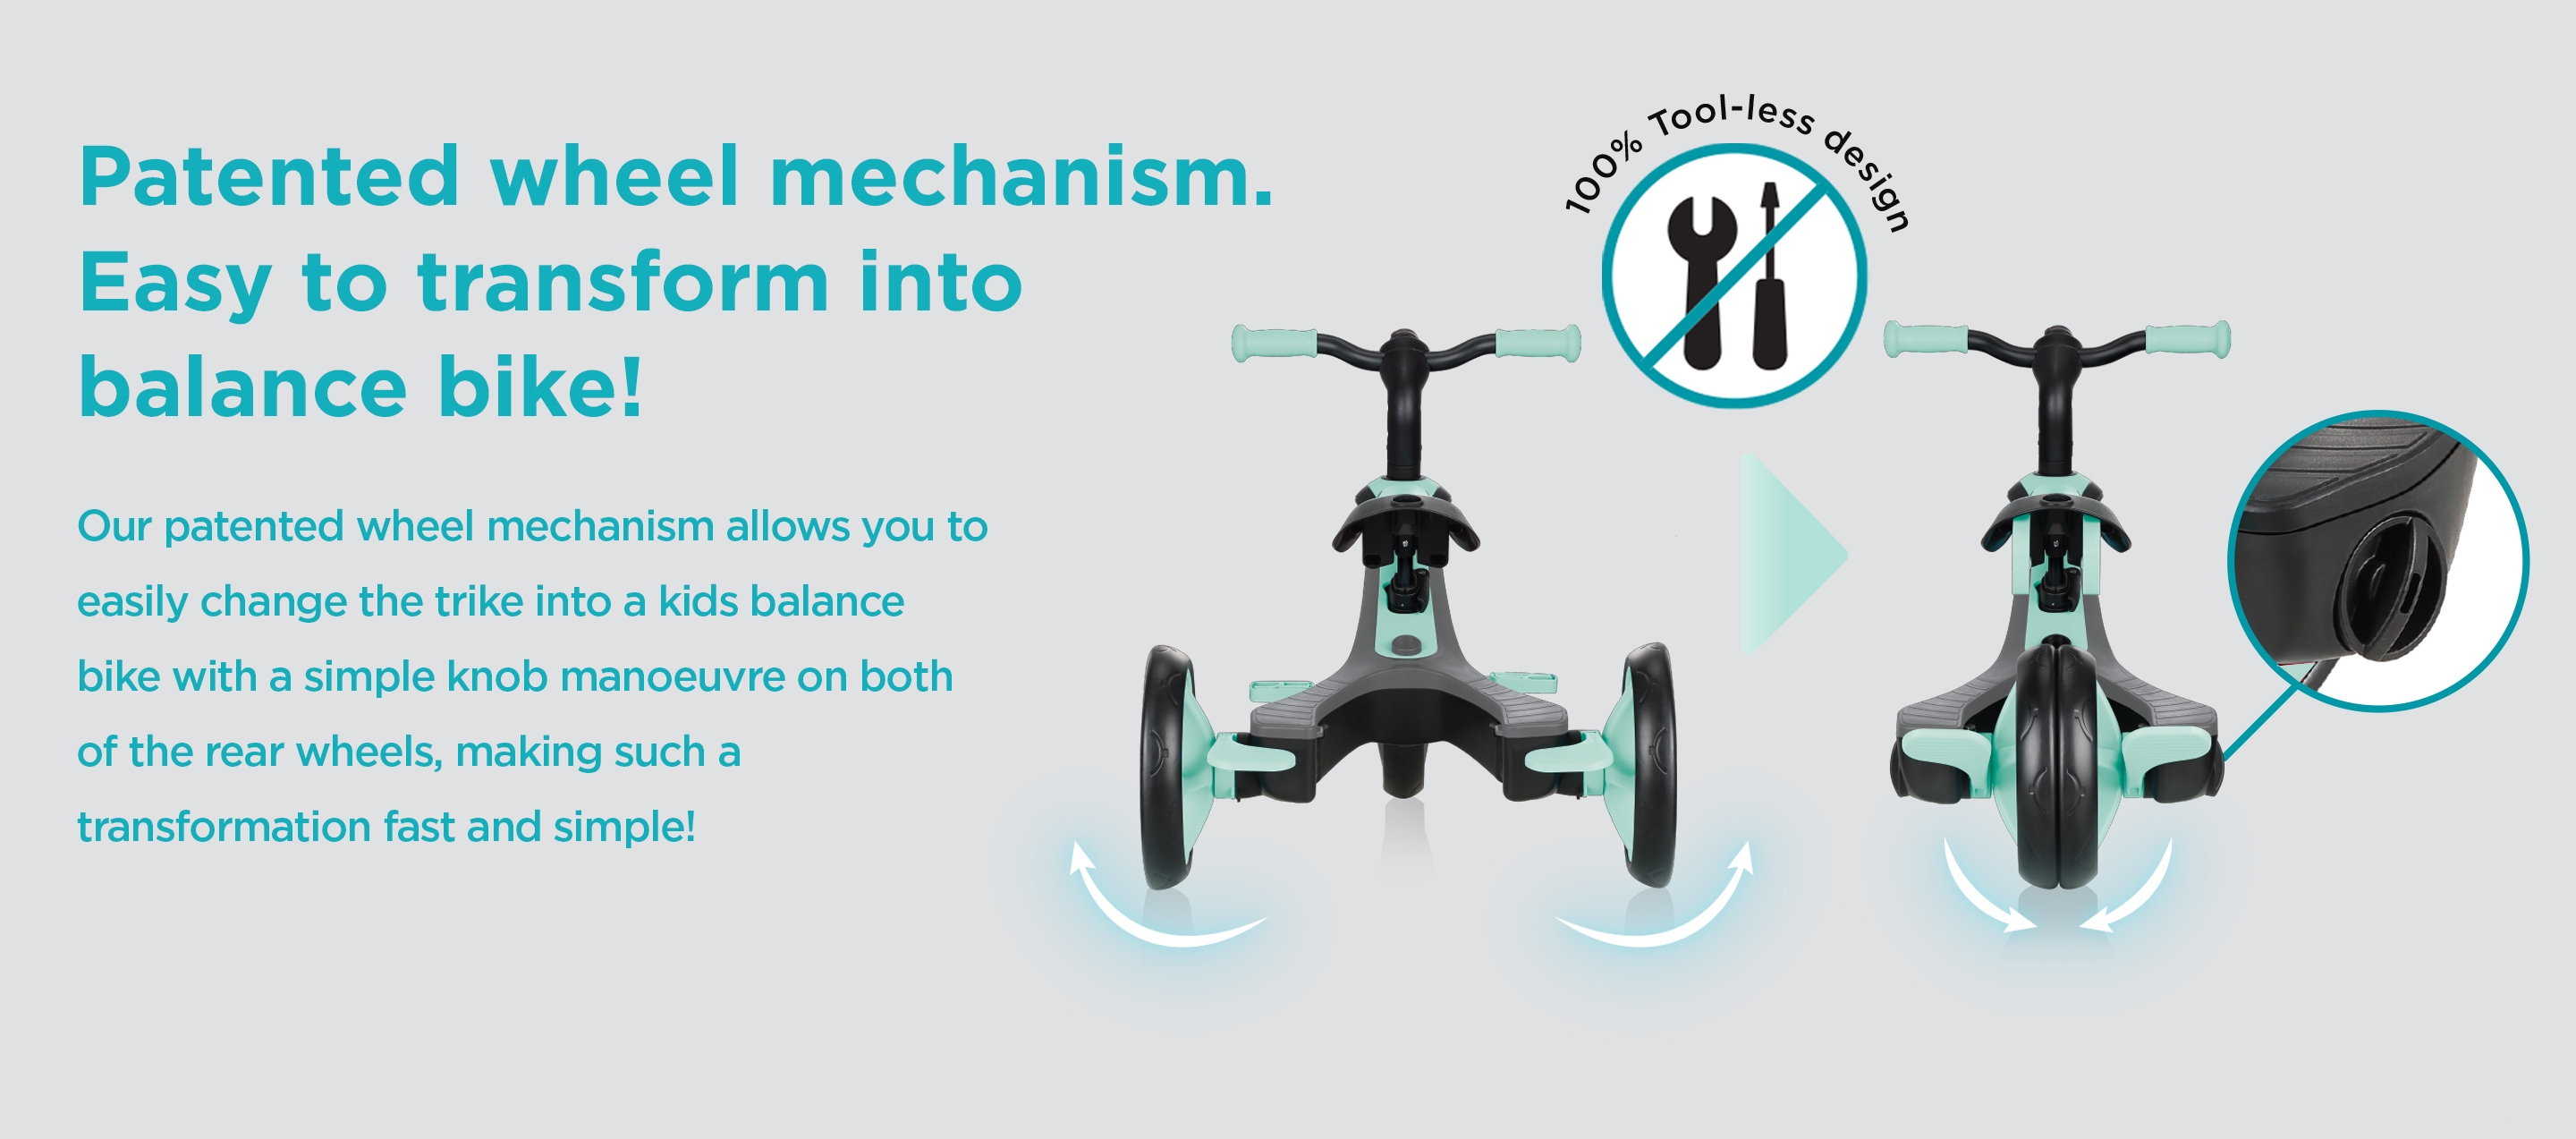 Patented wheel mechanism. Easy to transform into balance bike! Our patented wheel mechanism allows you to easily change the trike into a kids balance bike with a simple knob manoeuvre on both of the rear wheels, making such a transformation fast and simple! 